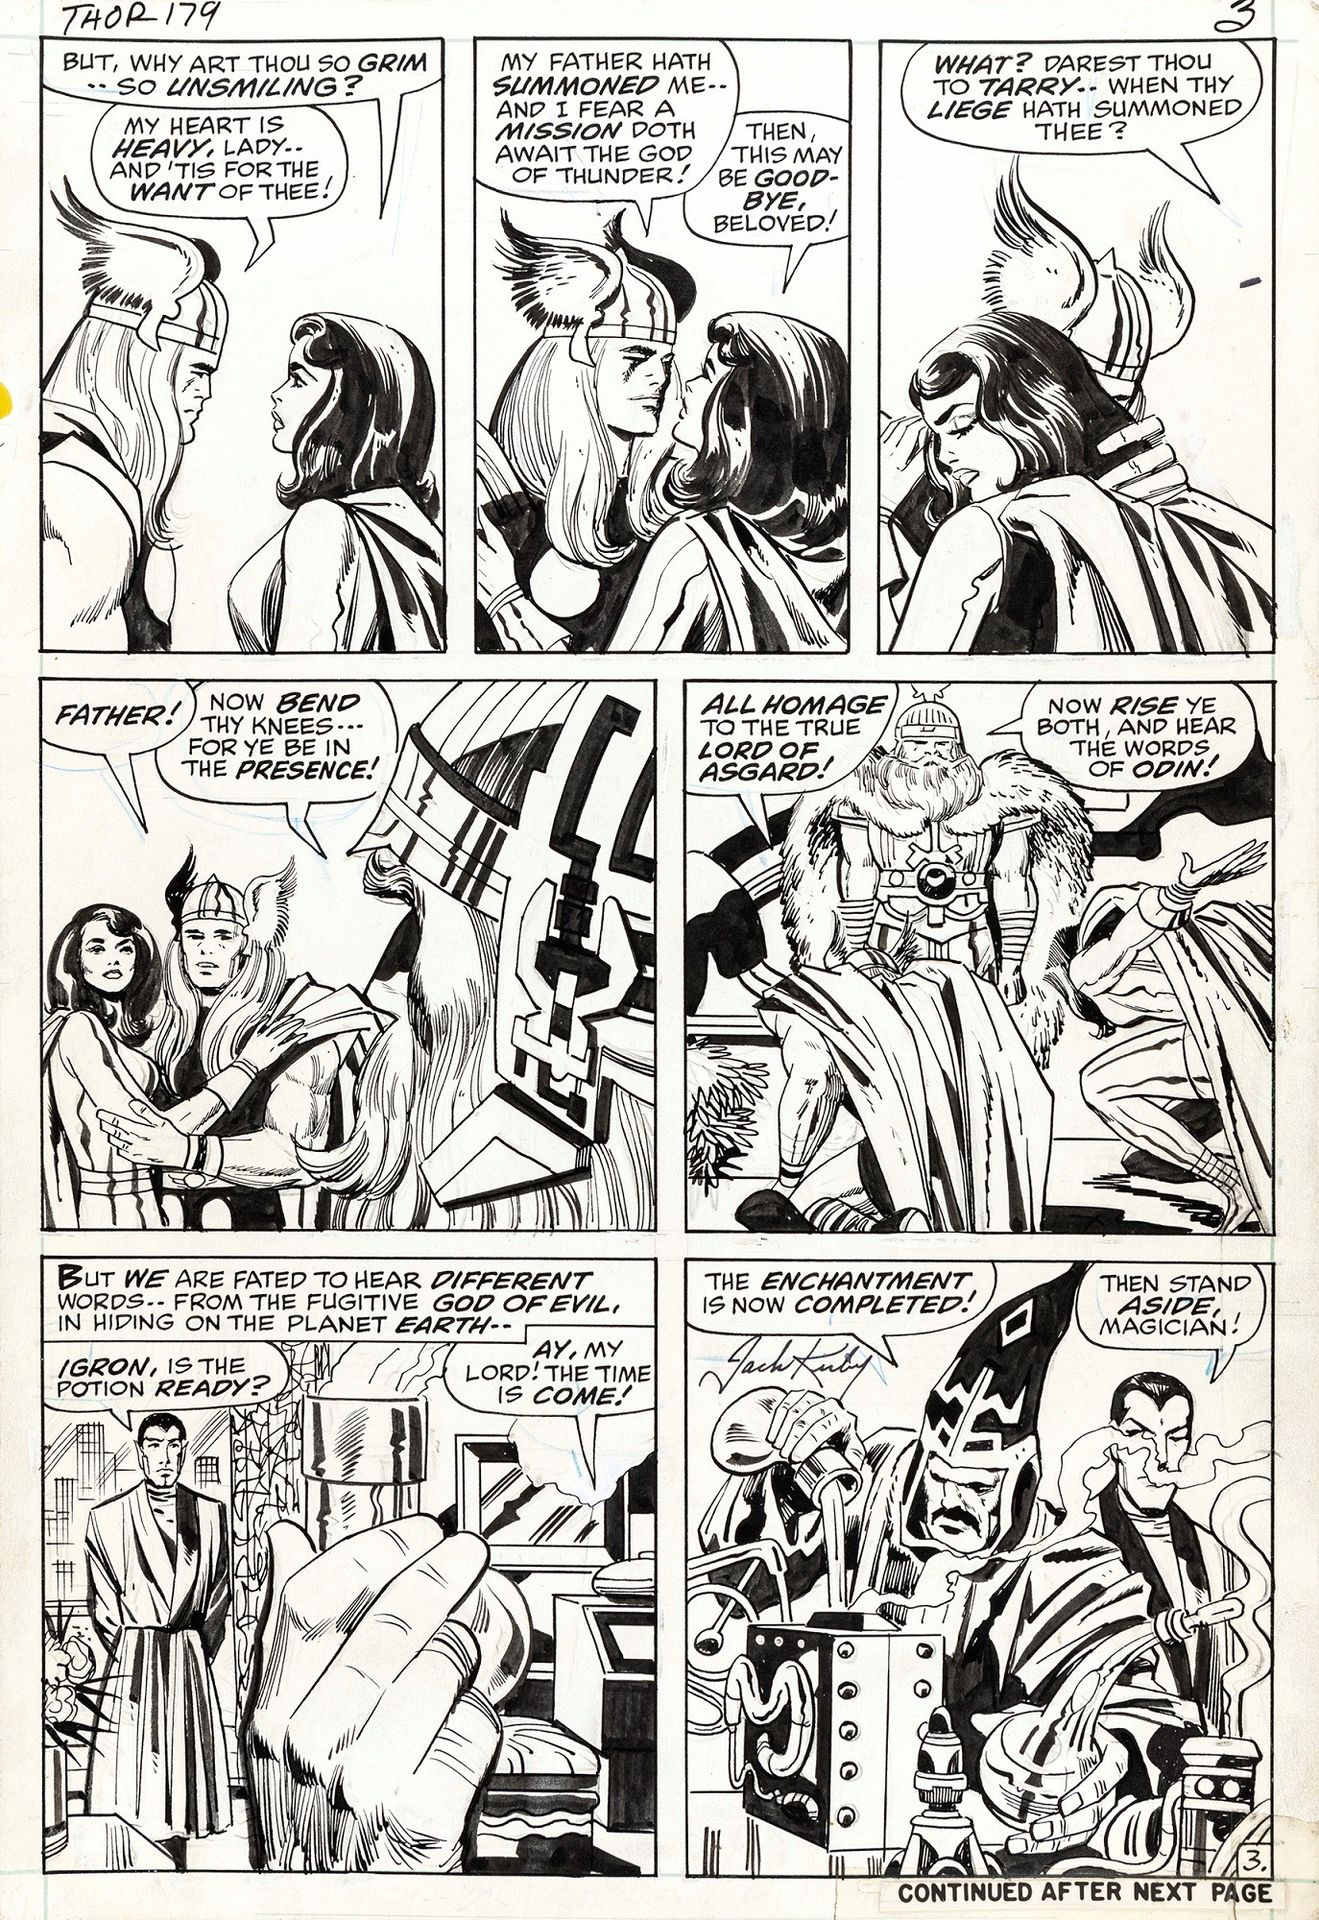 Jack Kirby Thor - No More the Thunder God!, 1970

pencil and ink on Marvel thin &hellip;